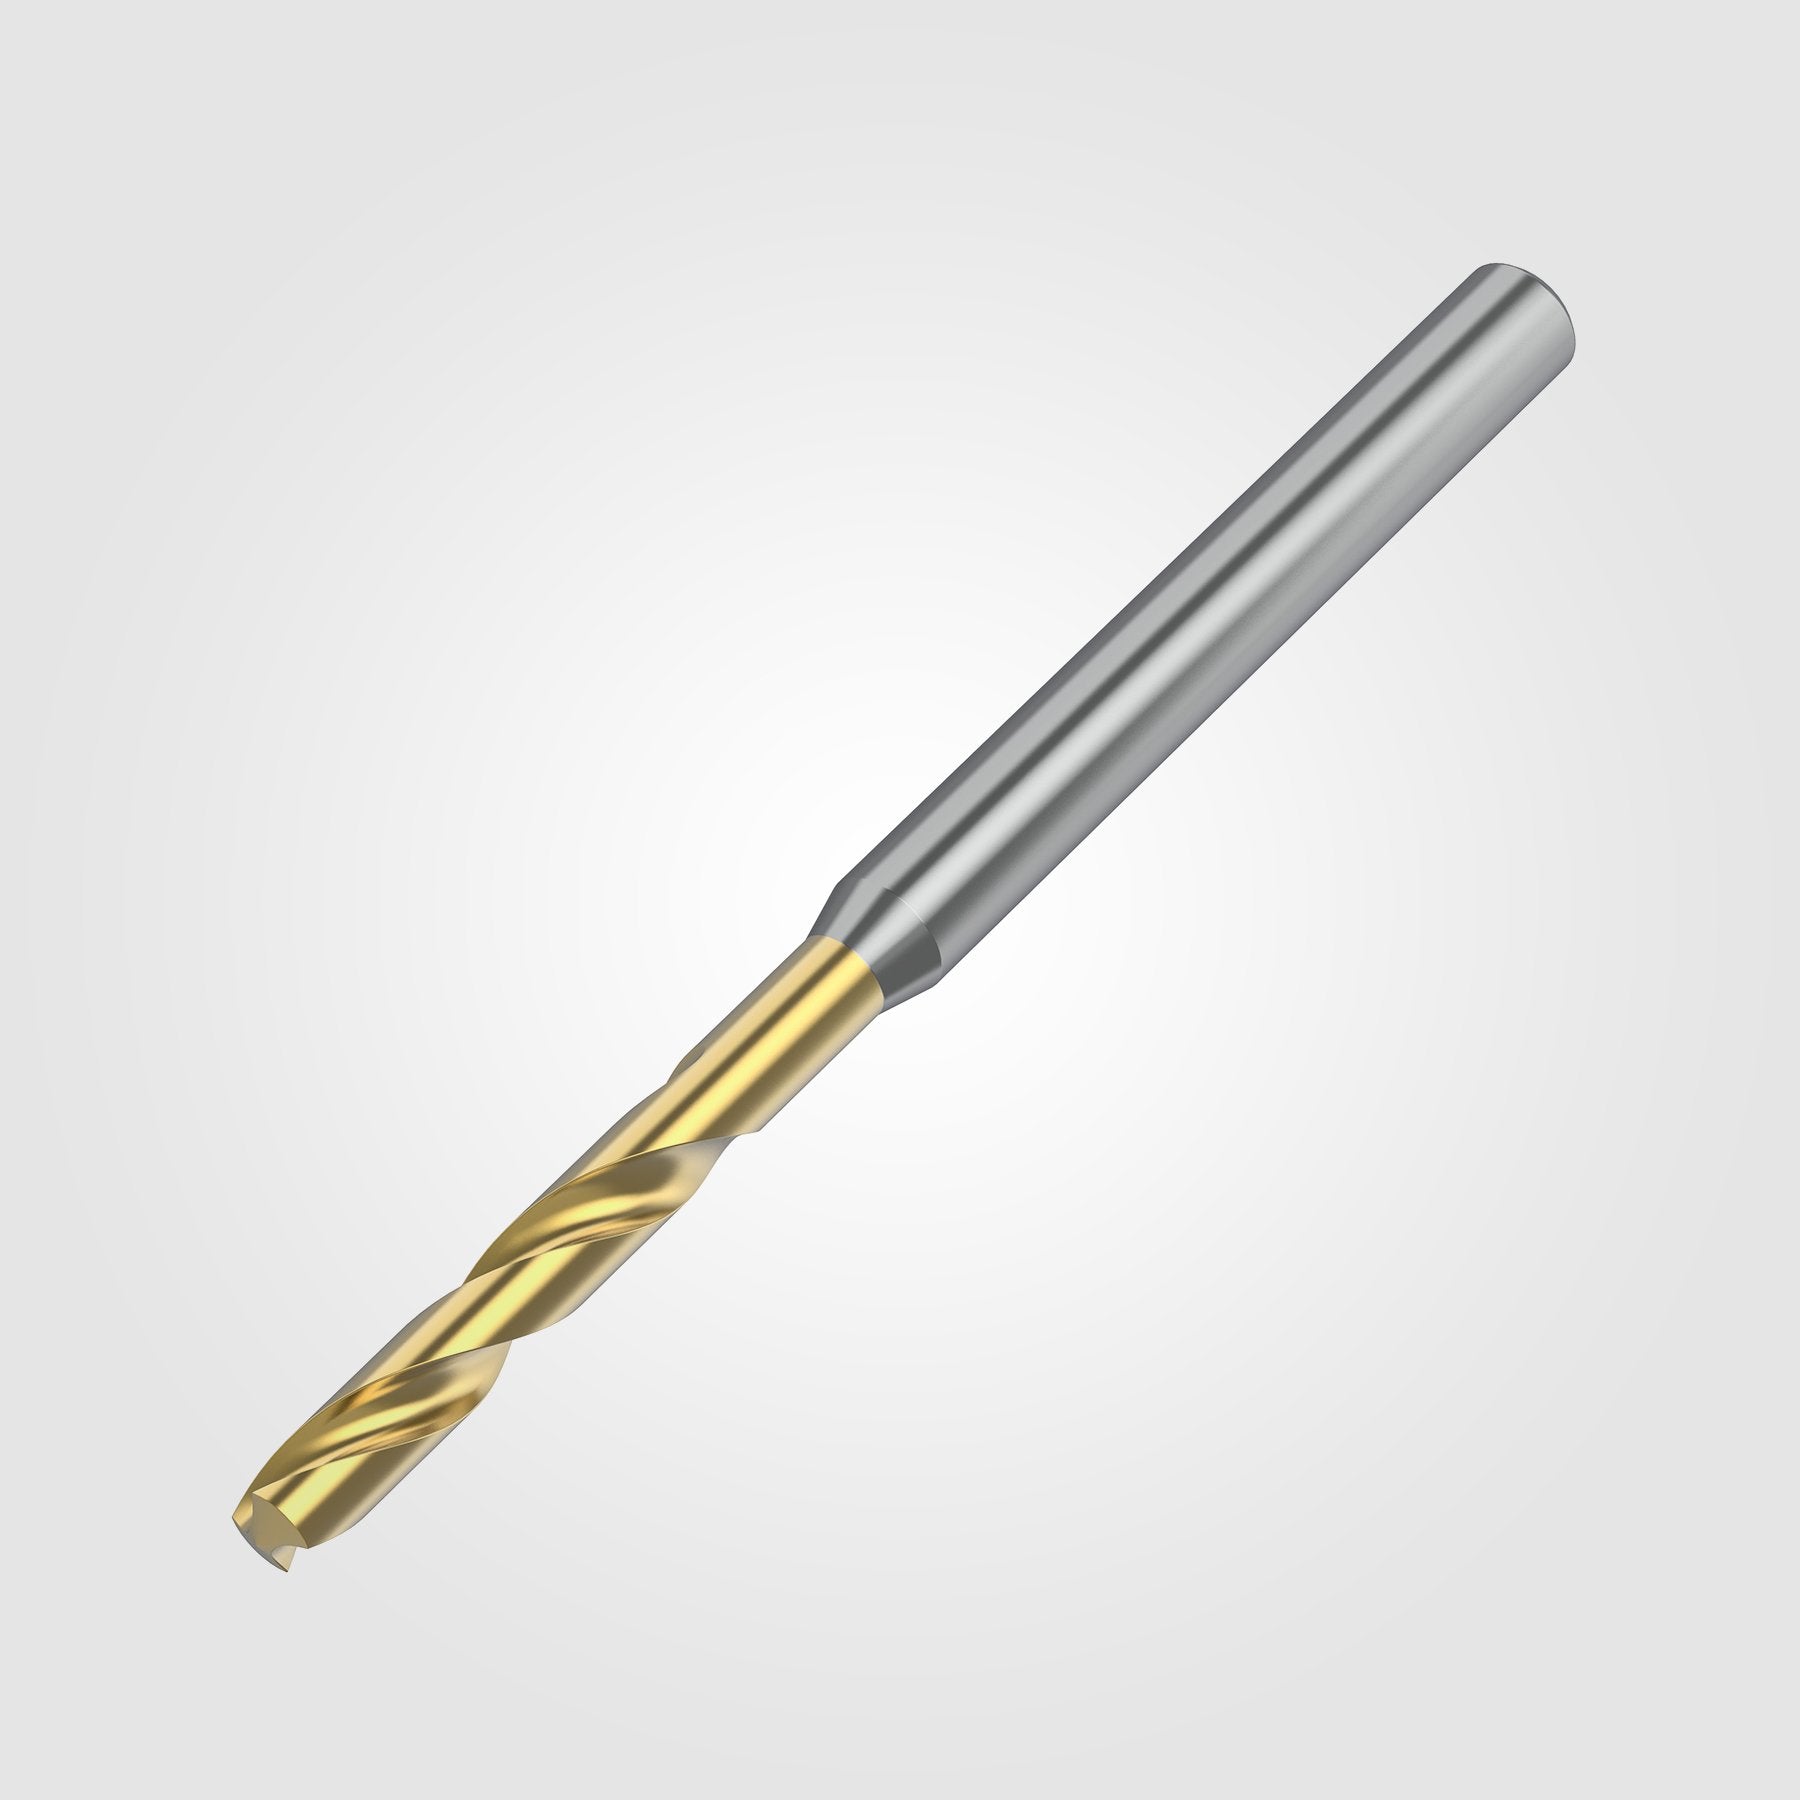 GOdrill (THROUGH COOLANT) | 13.1mm / .5157" / 3xD | SOLID CARBIDE DRILL | 4151242